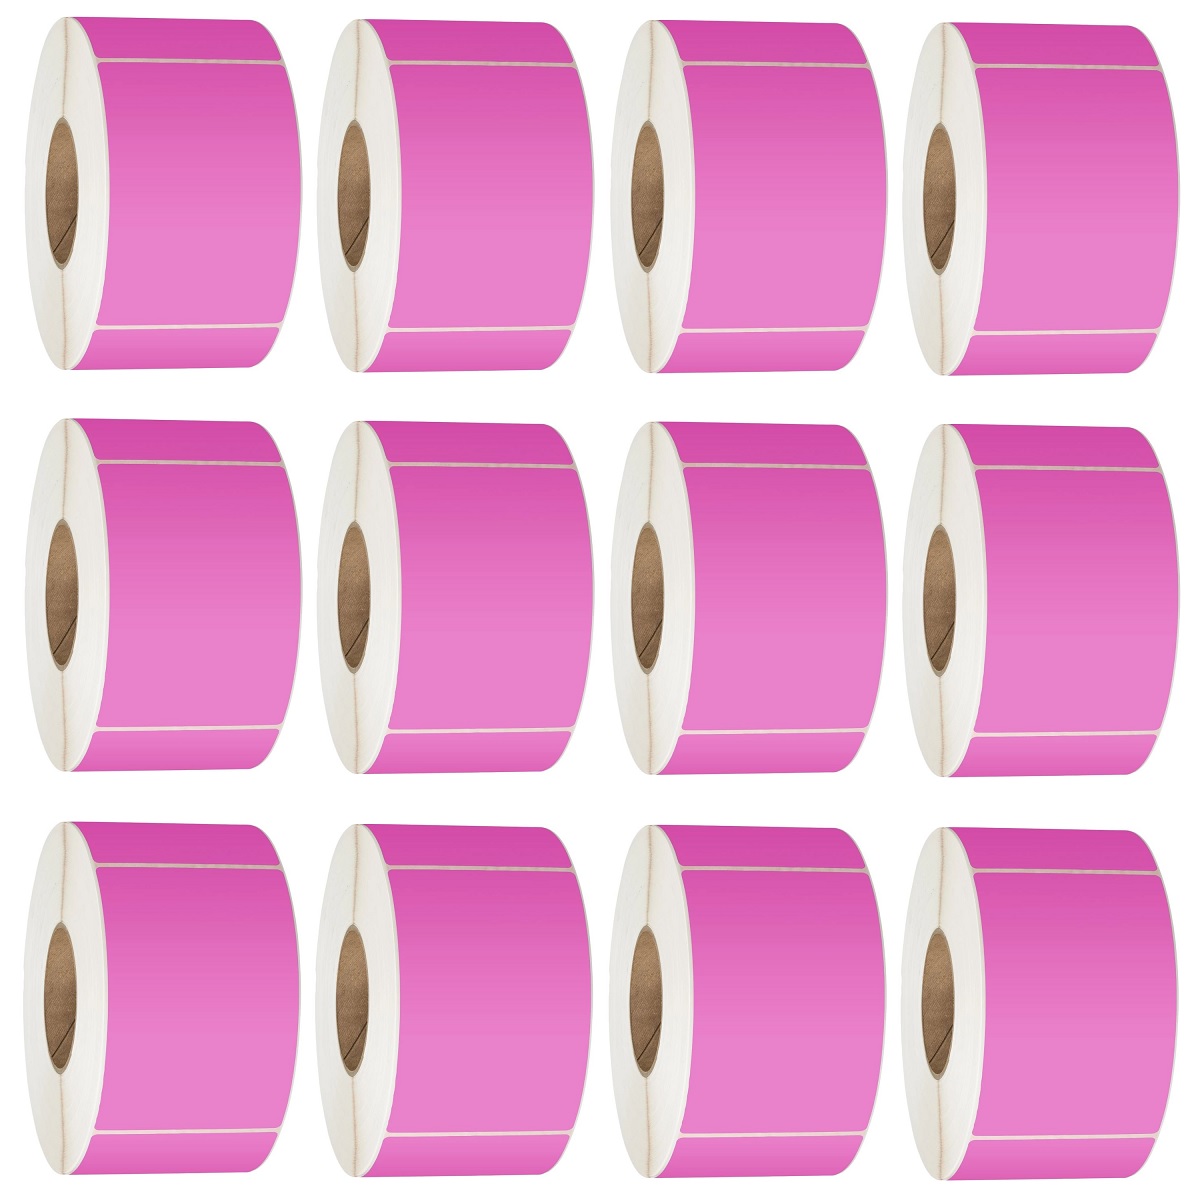 View 76X48 Thermal Transfer Labels 3000/Roll 76mm Core Pink - 12 Rolls